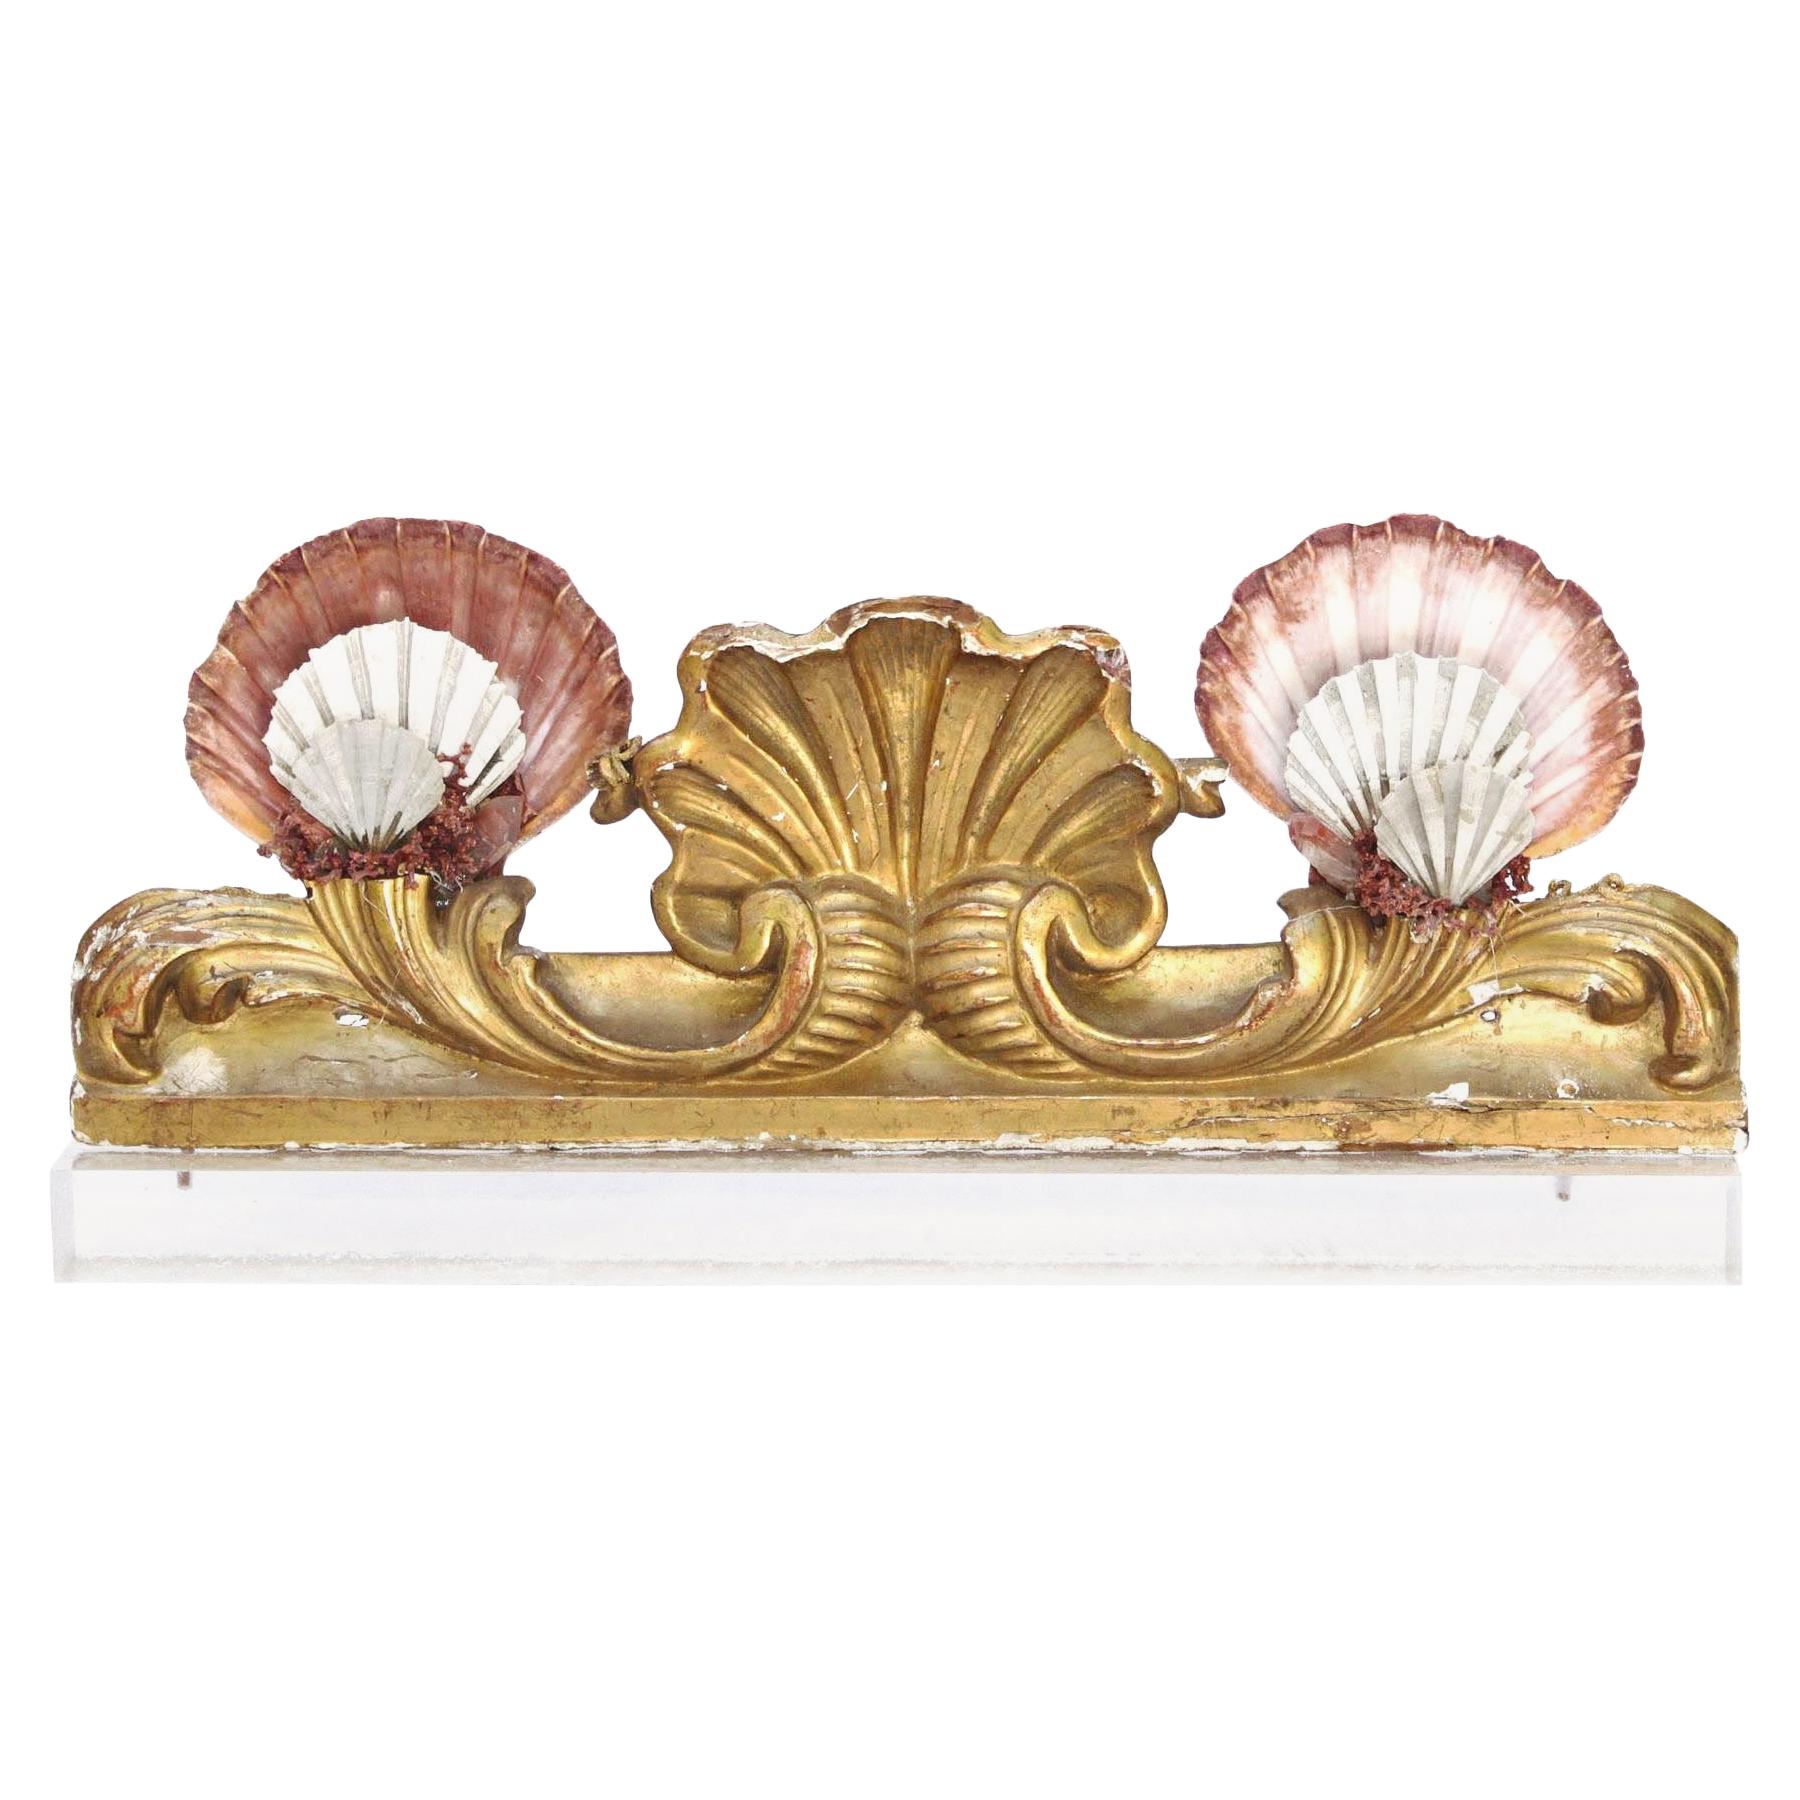 19th Century Italian Peditment Fragment with Pectin Shells and Crystal on Lucite